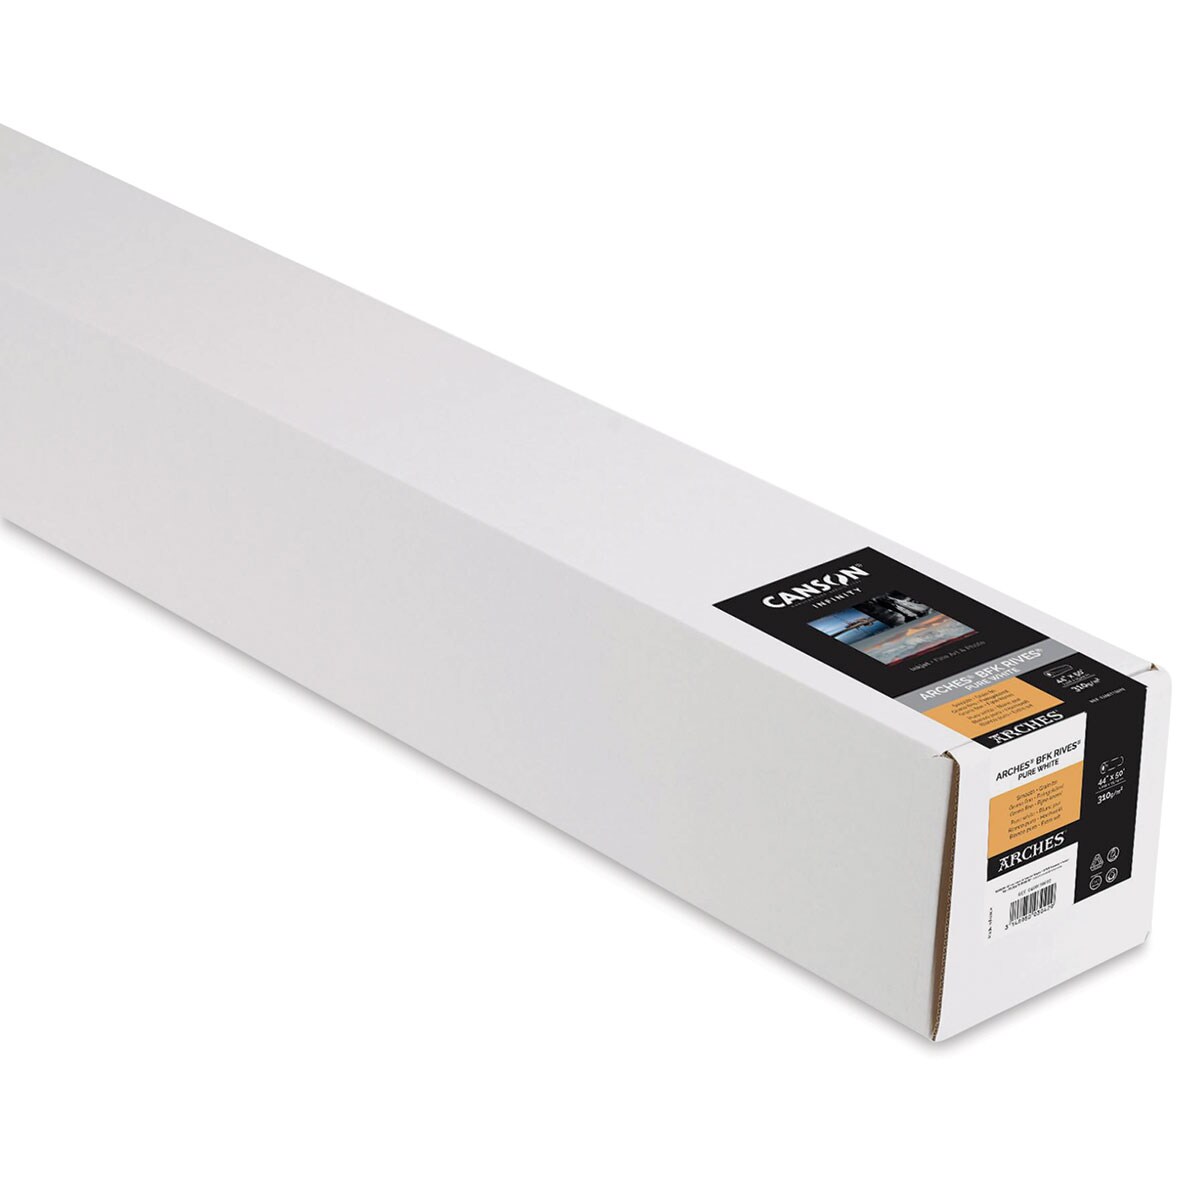 Canson Infinity Arches BFK Rives Inkjet Fine Art and Photo Paper - 44&#x22; x 50 ft, Pure White, 310 gsm, Roll